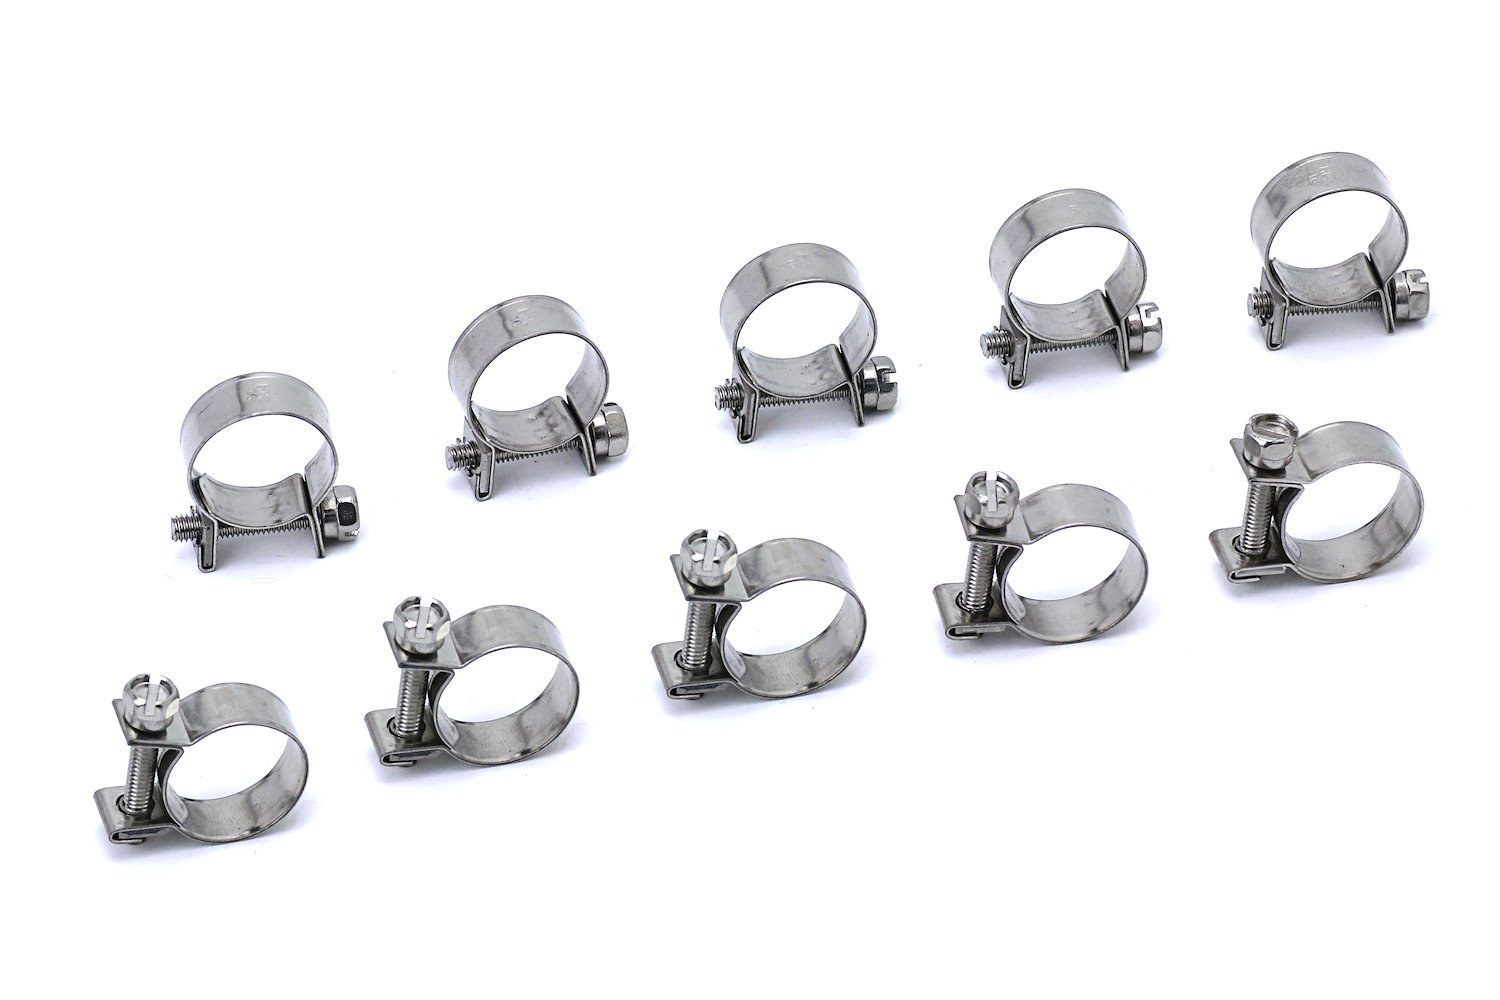 FIC-14x10 Fuel Injection Hose Clamp, 10 Stainless Steel Small Hose Clamps, SAE Size 16, 35/64 in. - 5/8 in. (14 mm-16 mm)